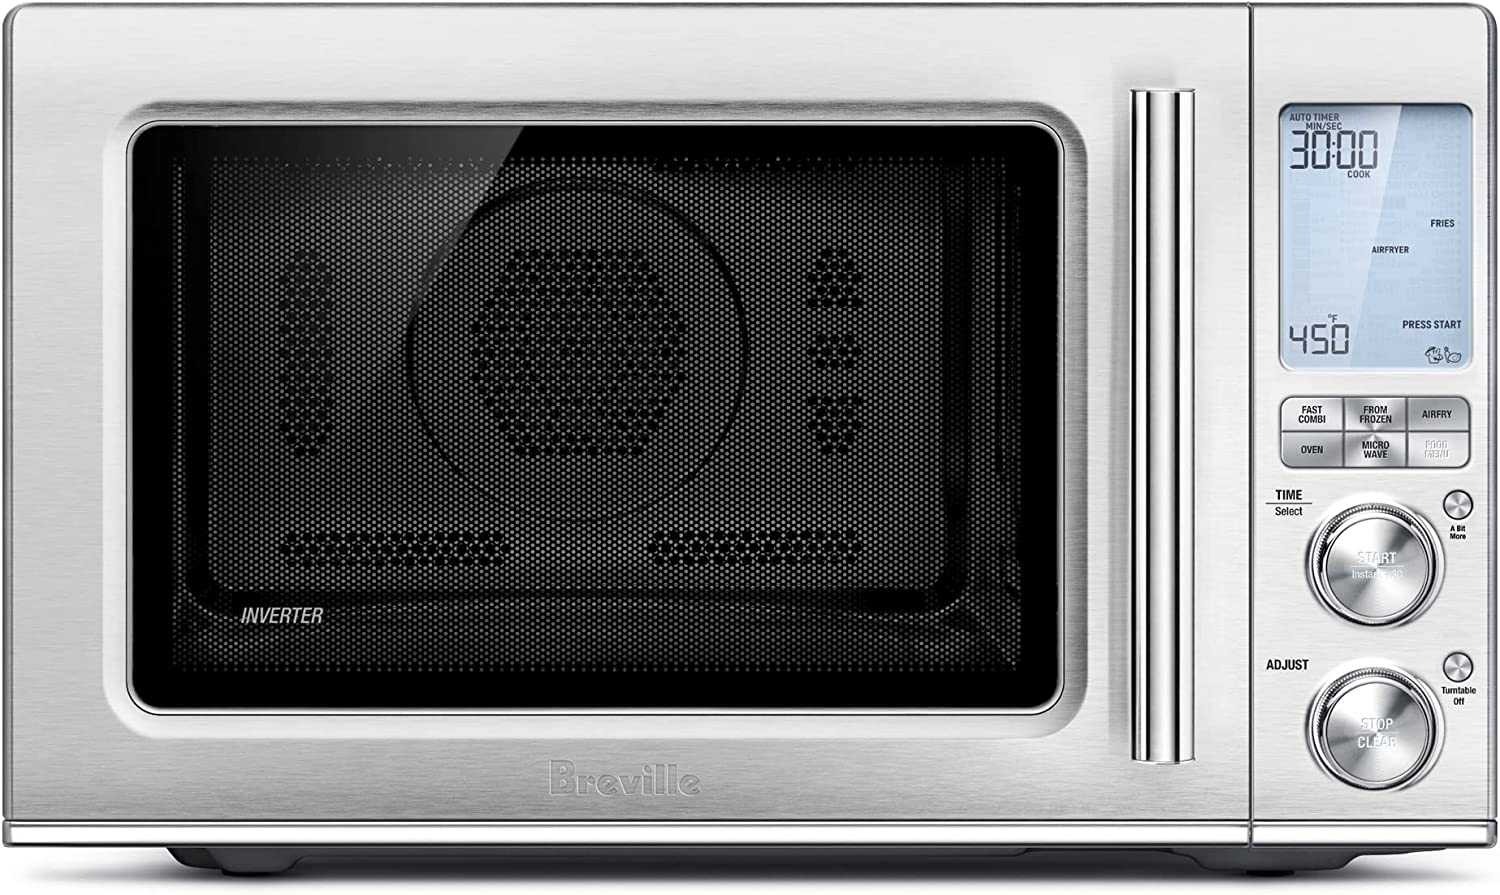 Breville Combi Wave Microwave Toaster Oven | DeviceDaily.com